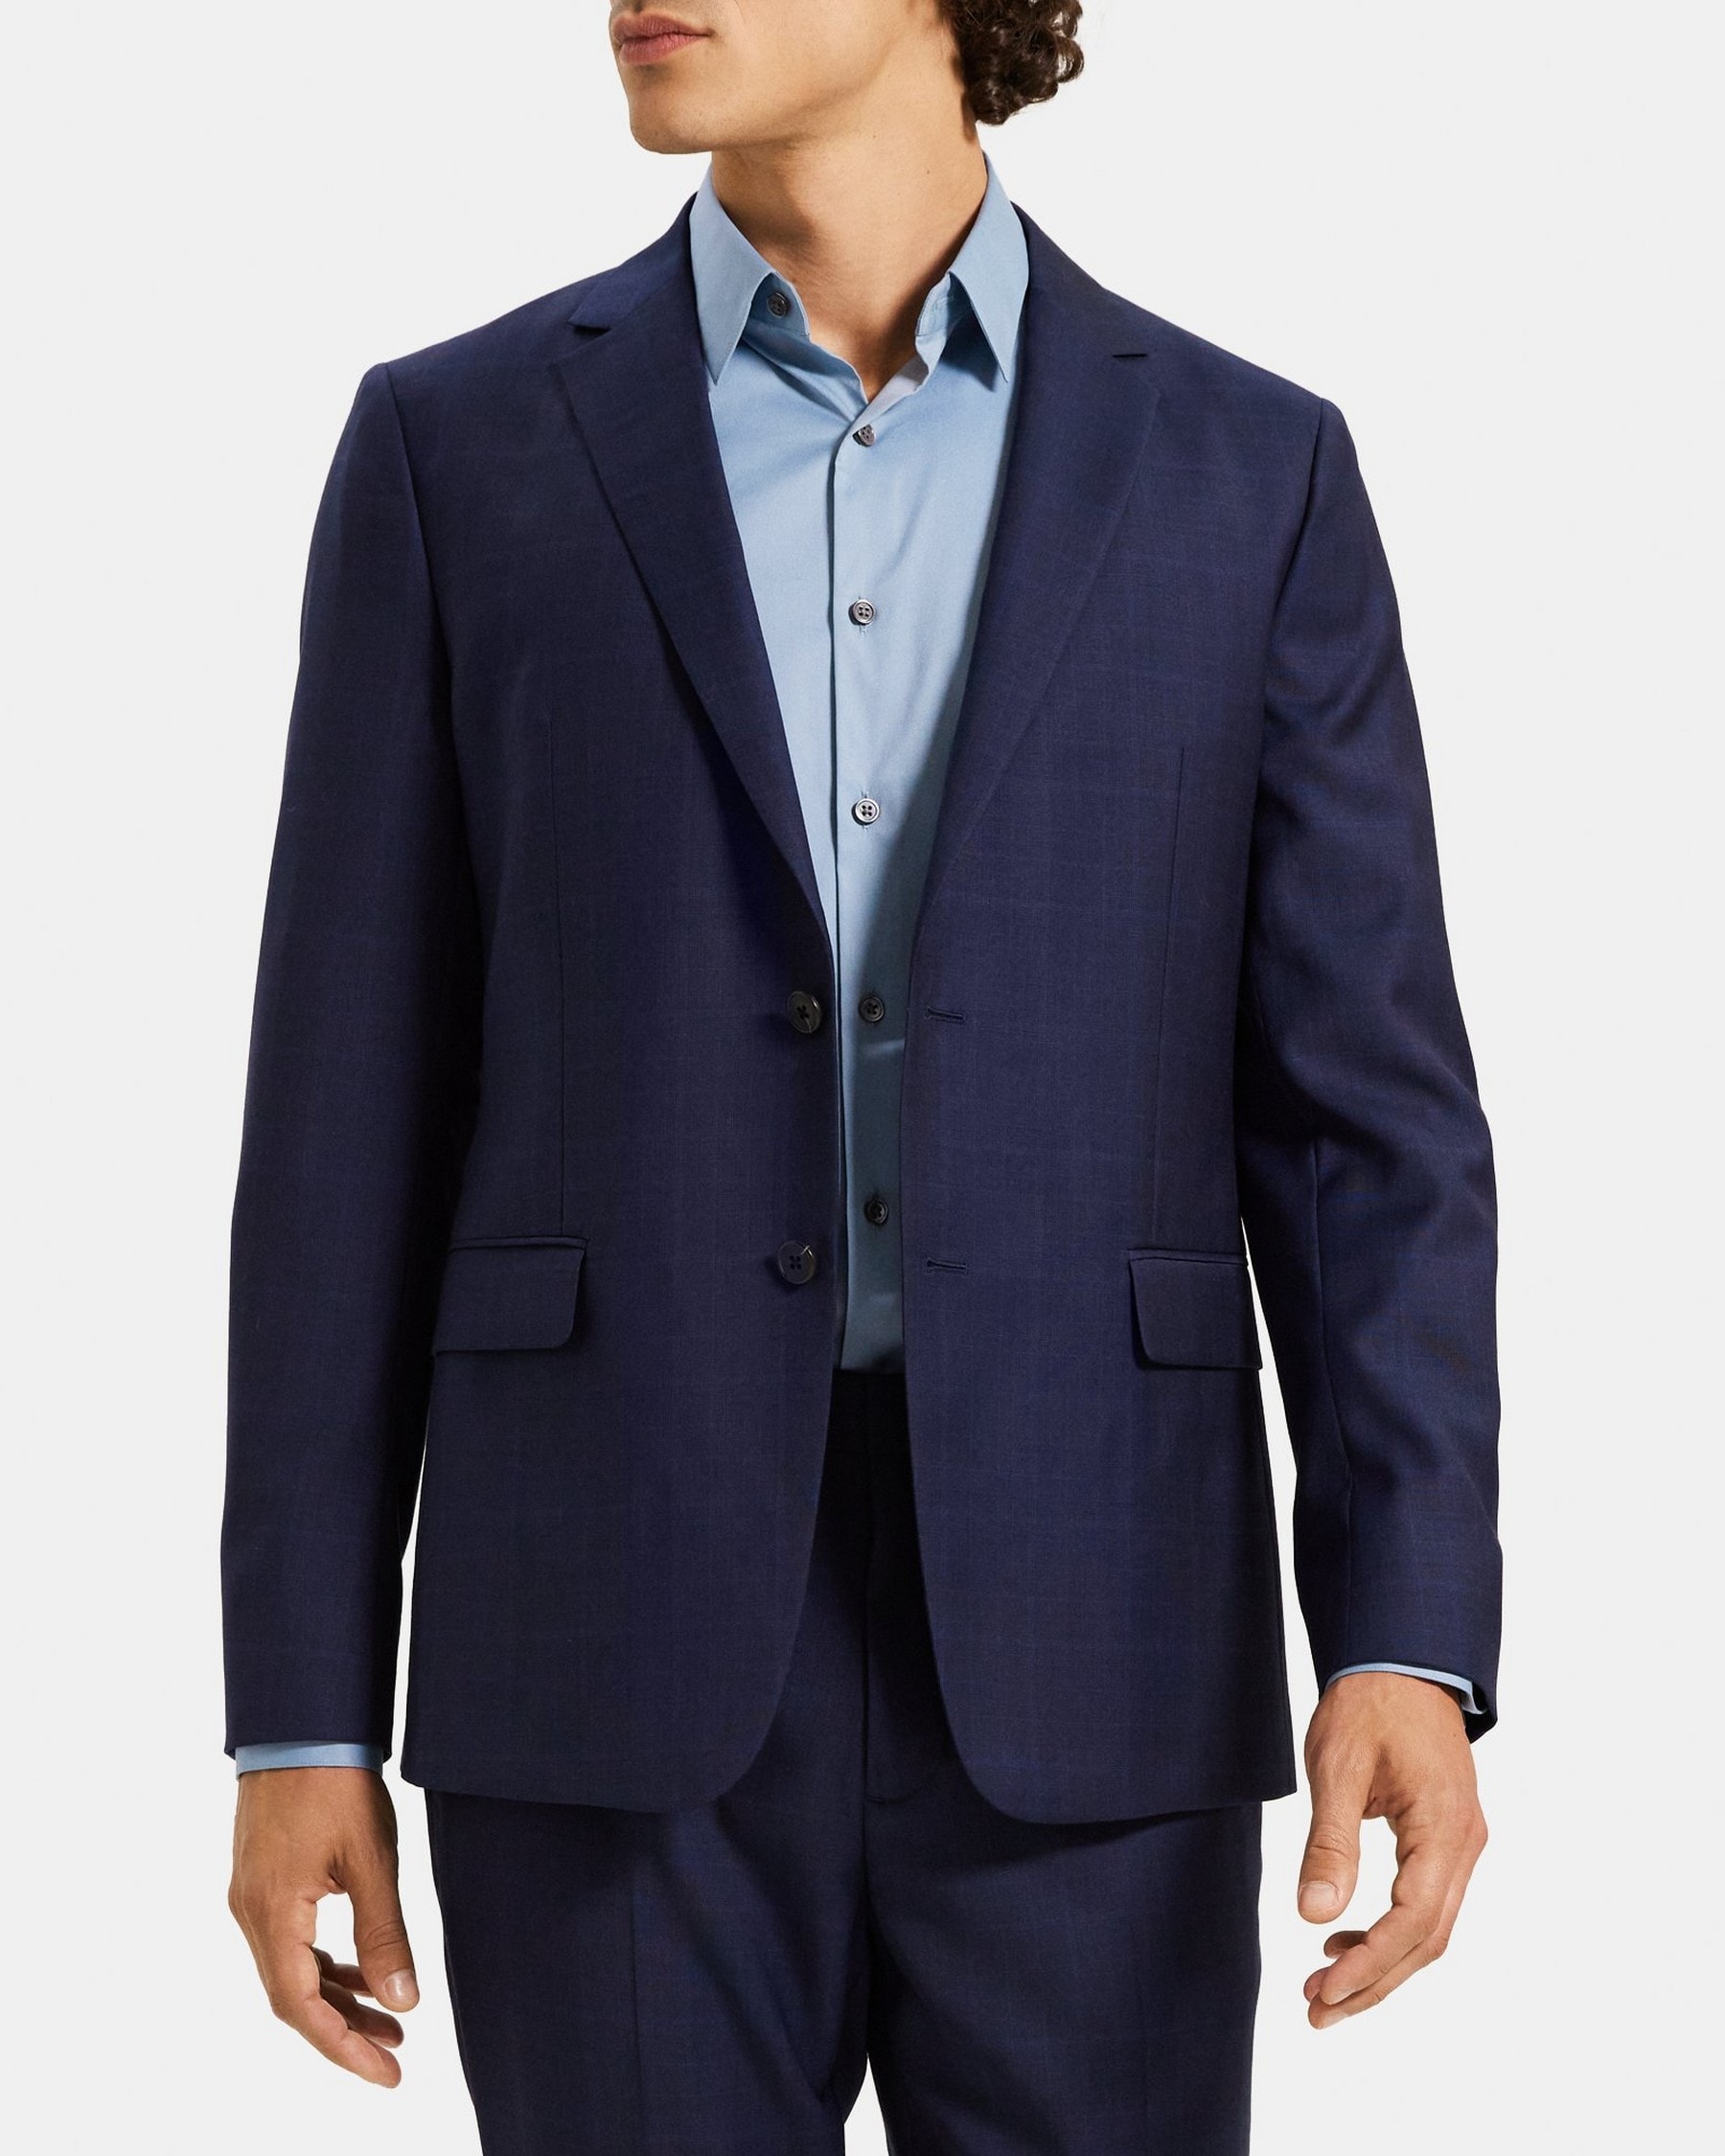 Theory Unstructured Suit Jacket in Plaid Wool